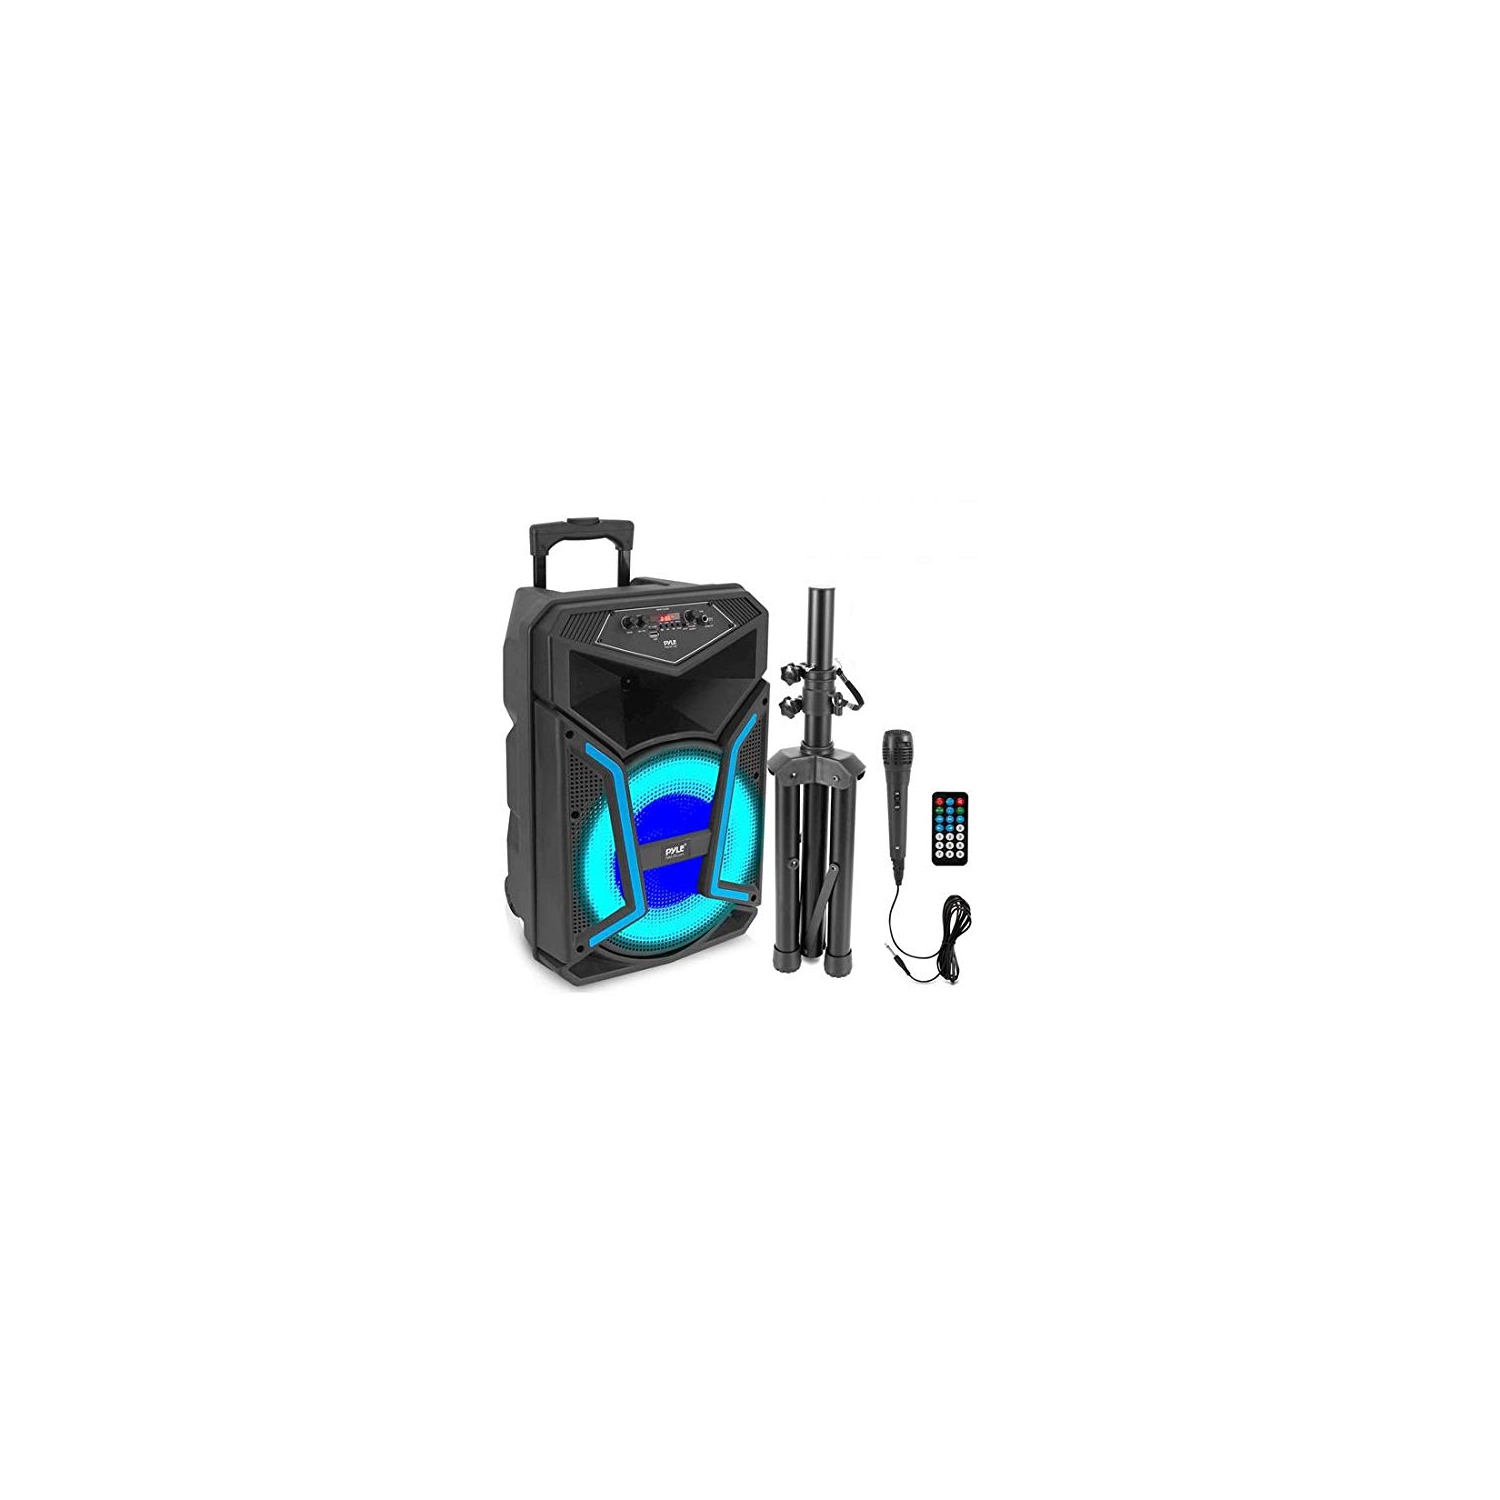 Portable Bluetooth PA Speaker System 800W Outdoor Bluetooth Speaker Portable PA System w/ Microphone In, Party Lights, MP3/USB, FM Radio, Rolling Wheels Mic, Remote PPHP122SM